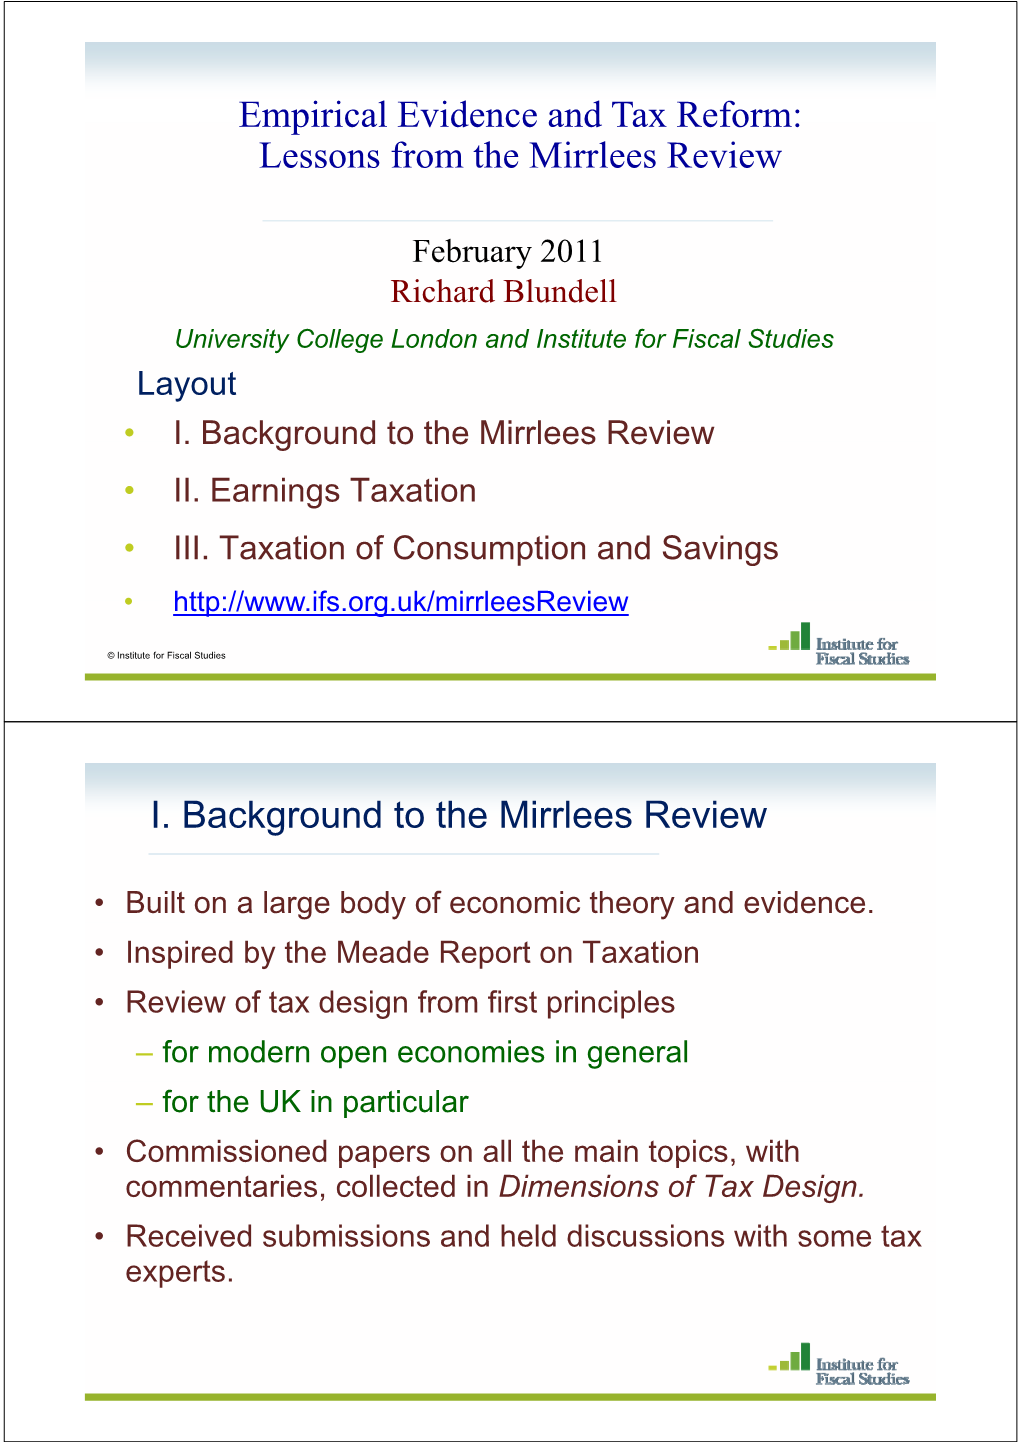 Empirical Evidence and Tax Reform: Lessons from the Mirrlees Review I